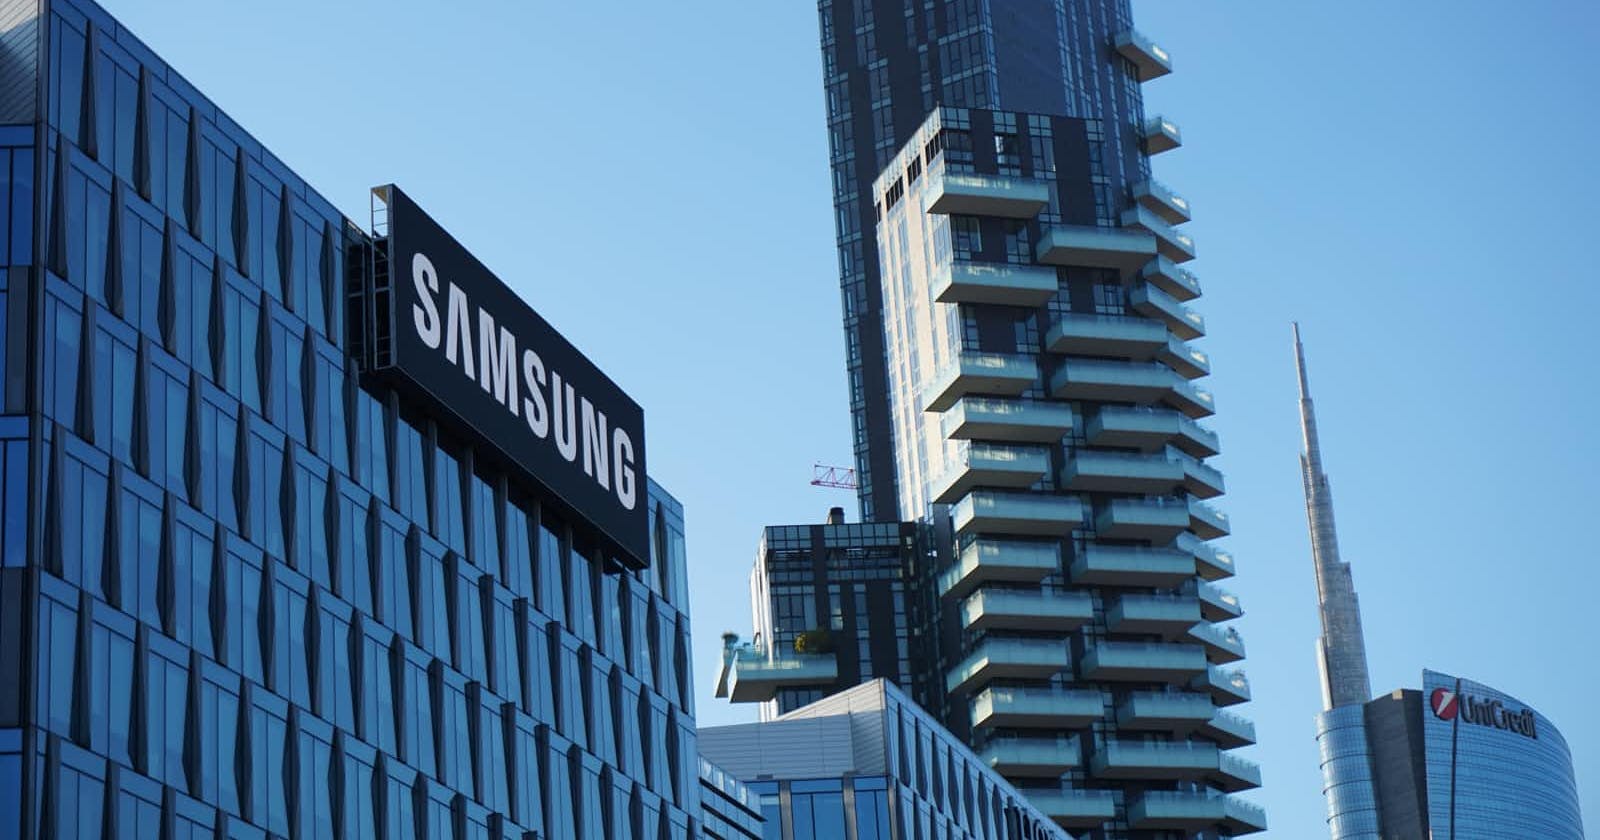 Samsung Group Employees Prepare for Oral Proficiency Tests